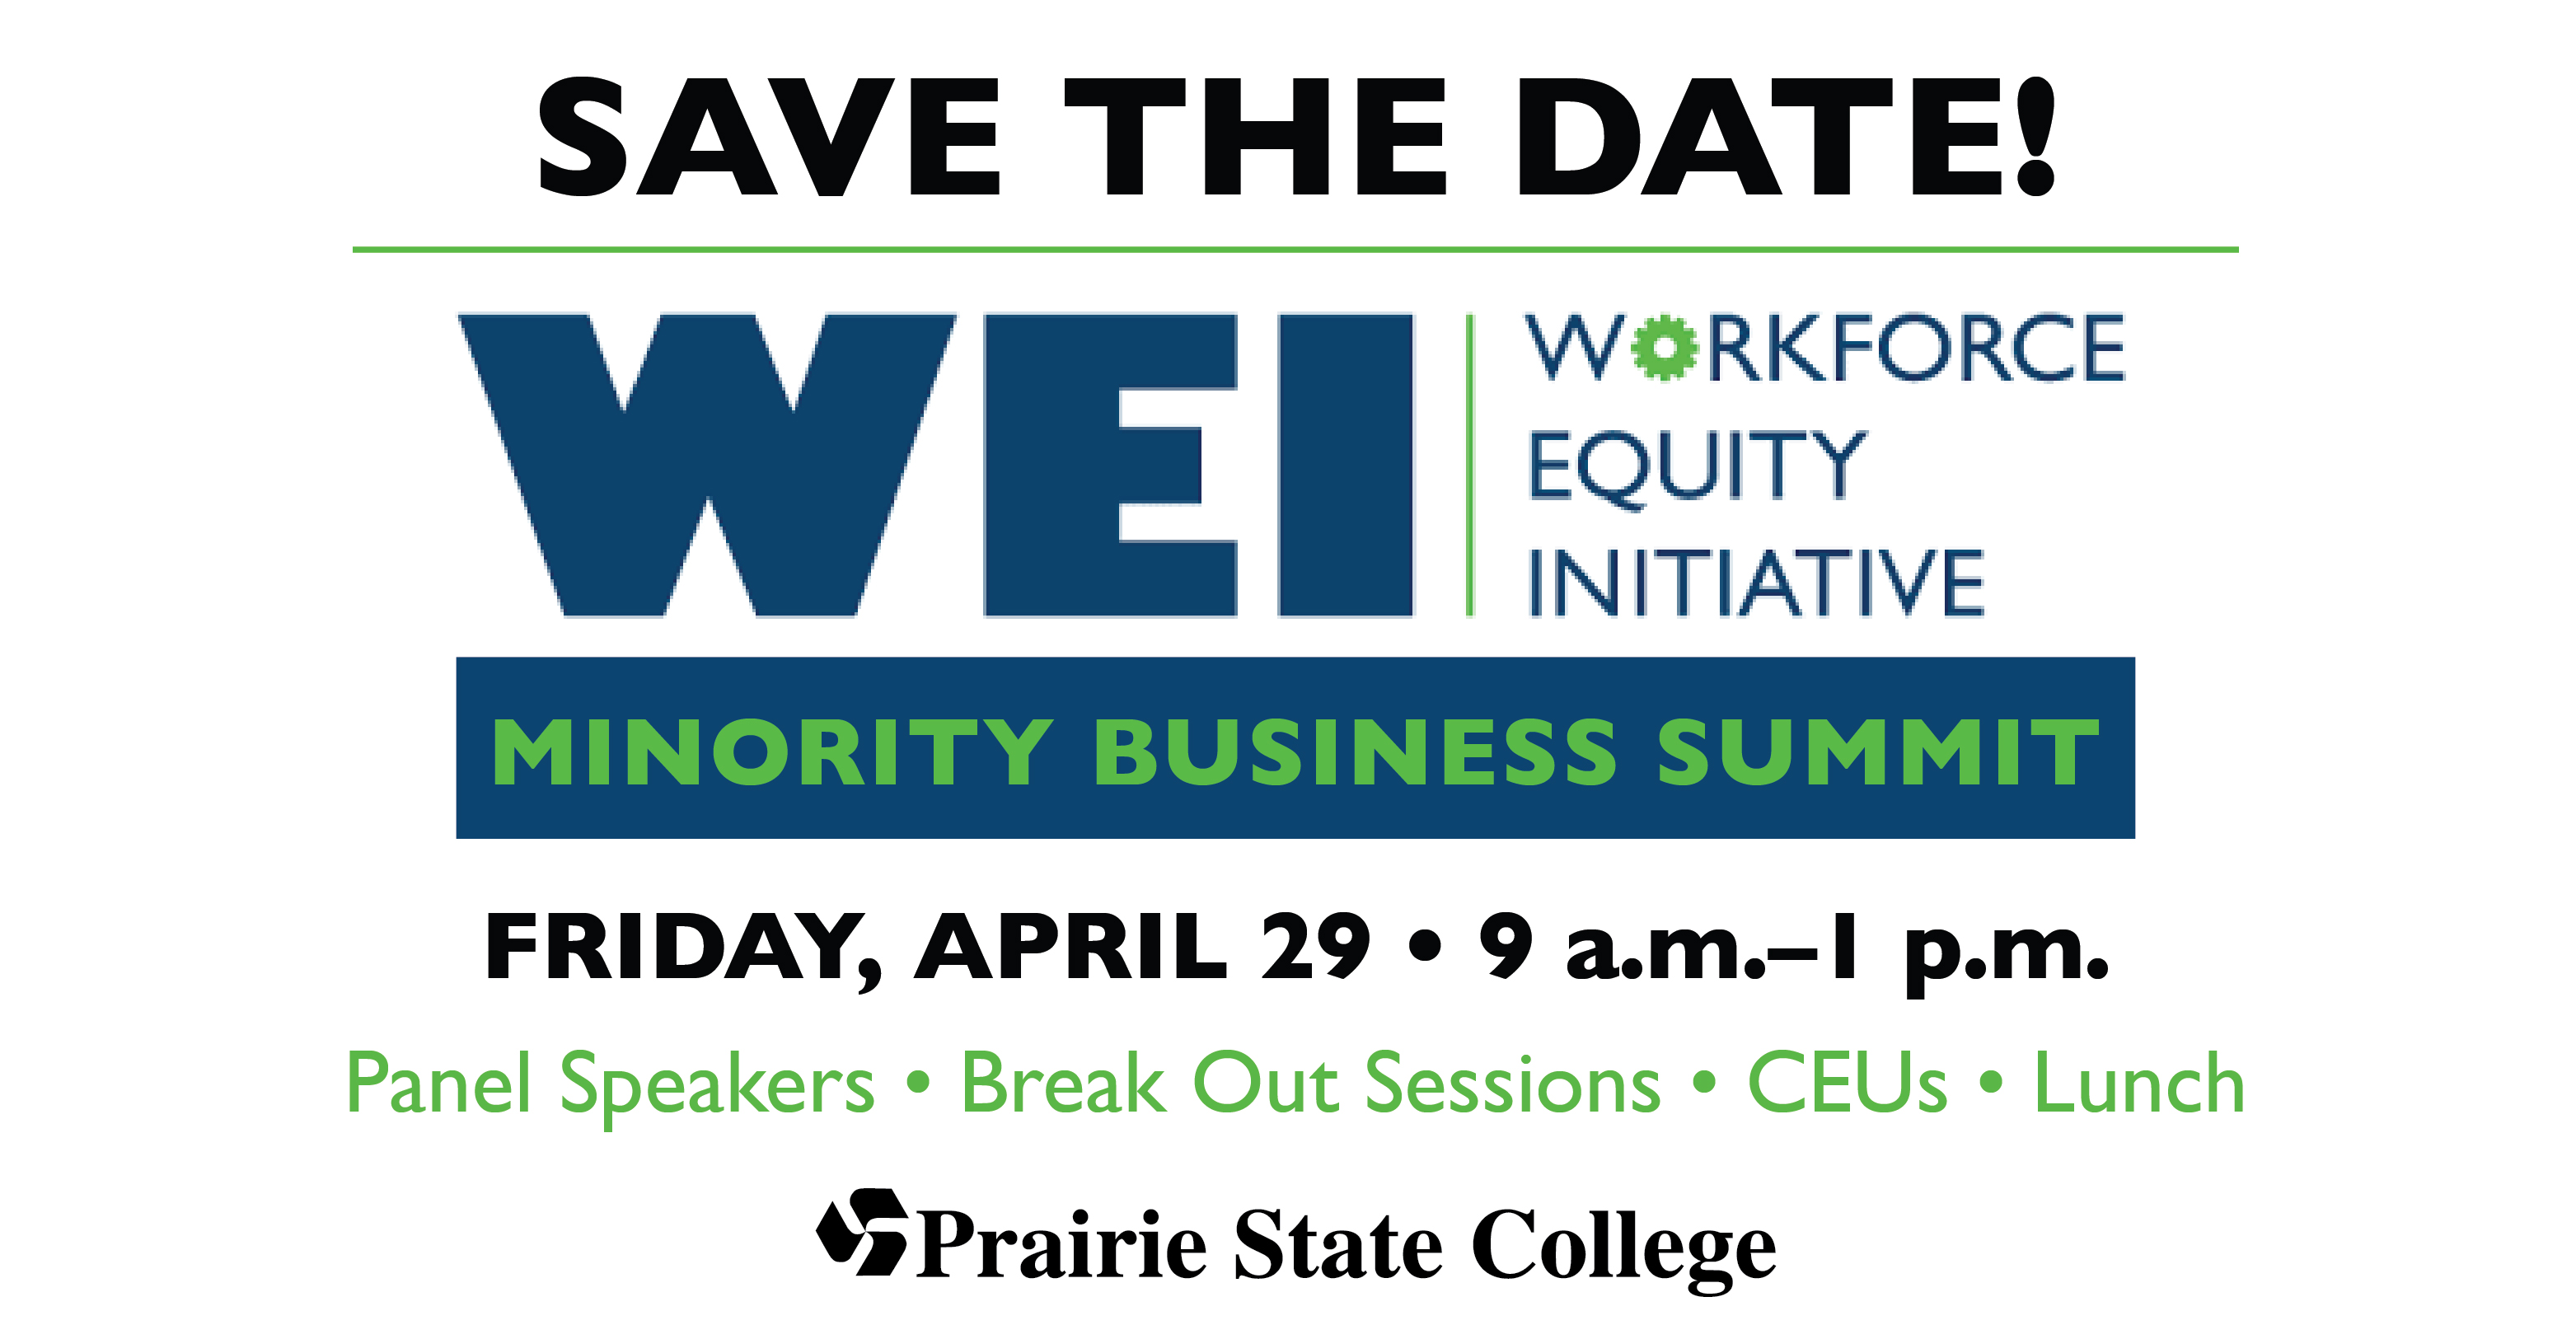 Save the date! Workforce Equity Inclusion Minority Business Summit, Friday, April 29th from 9 a.m. until 1 p.m. 